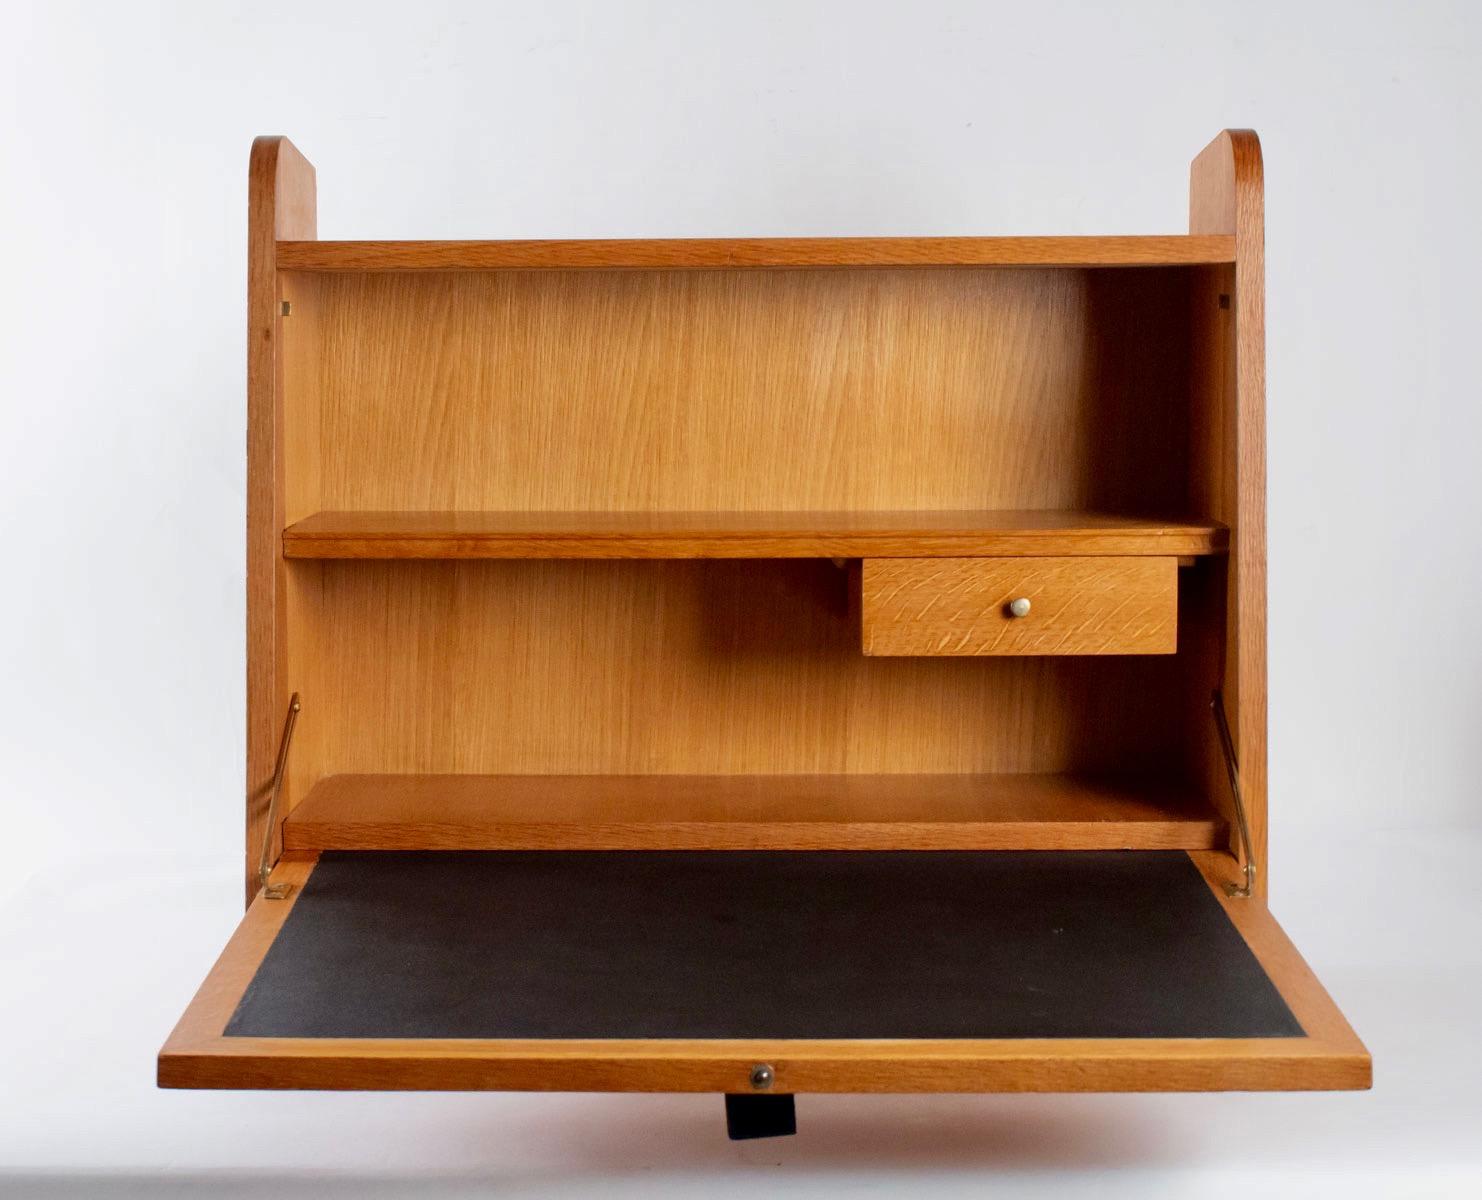 Vintage French design wall cabinet desk designed by Marcel Gascoin for Arhec Eidtor. The organic and simple design breaths 1950s French design. This model is a compact desk easy to fix to walls. The pull-out desk area makes for a comfortable working